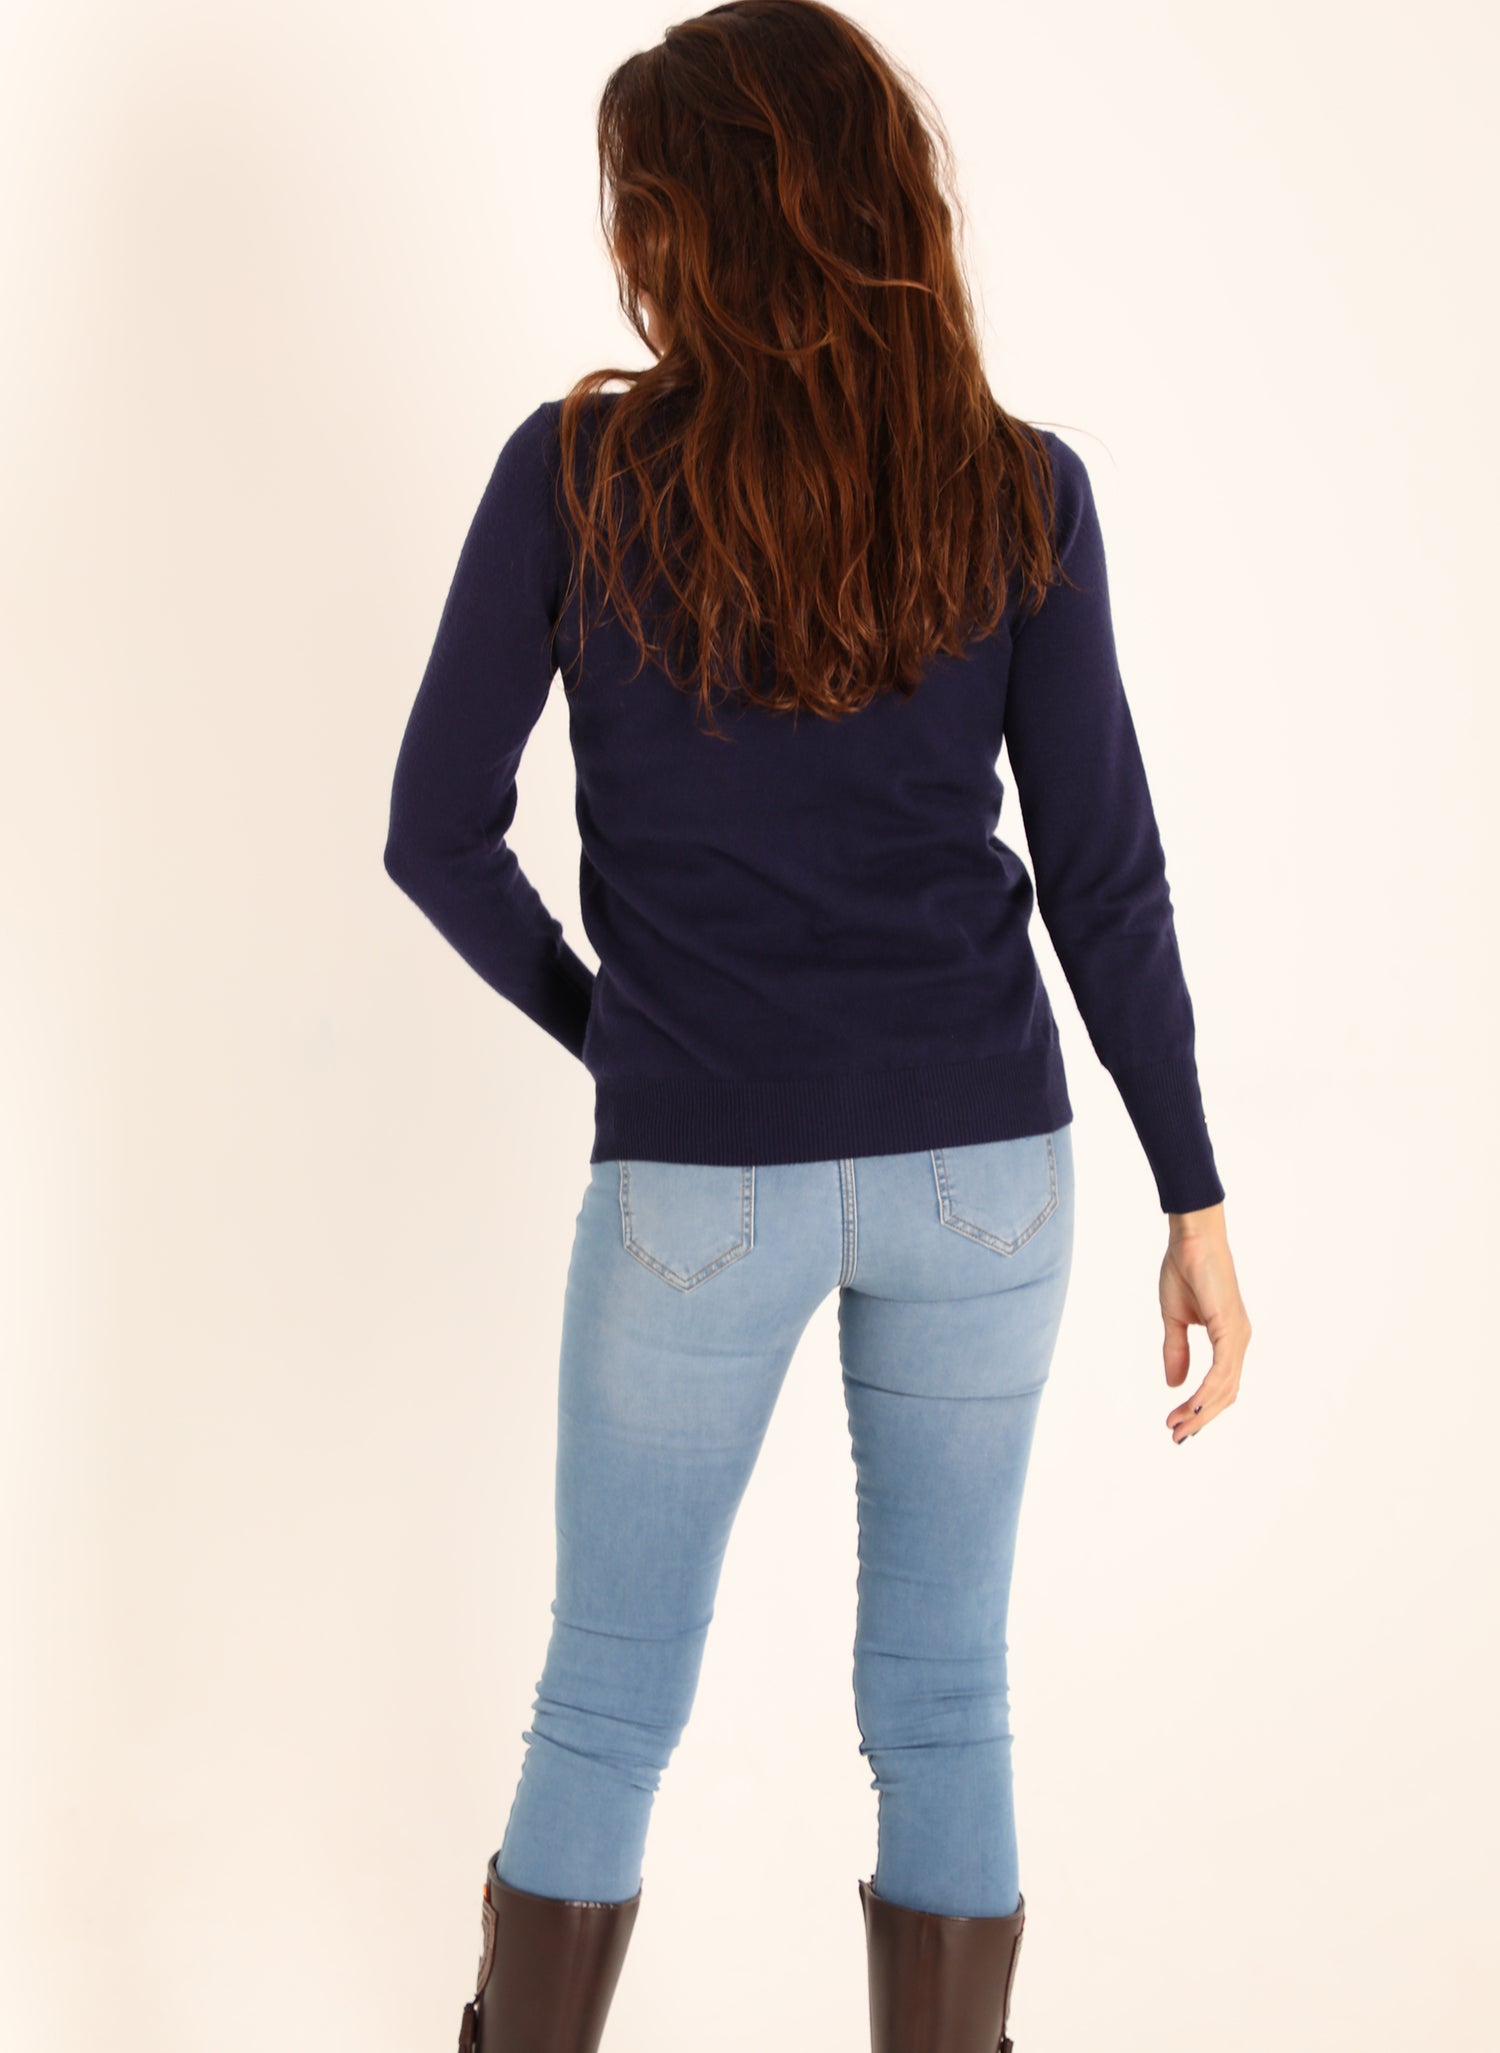 Women's Blue Crew Neck Sweater with Buttons